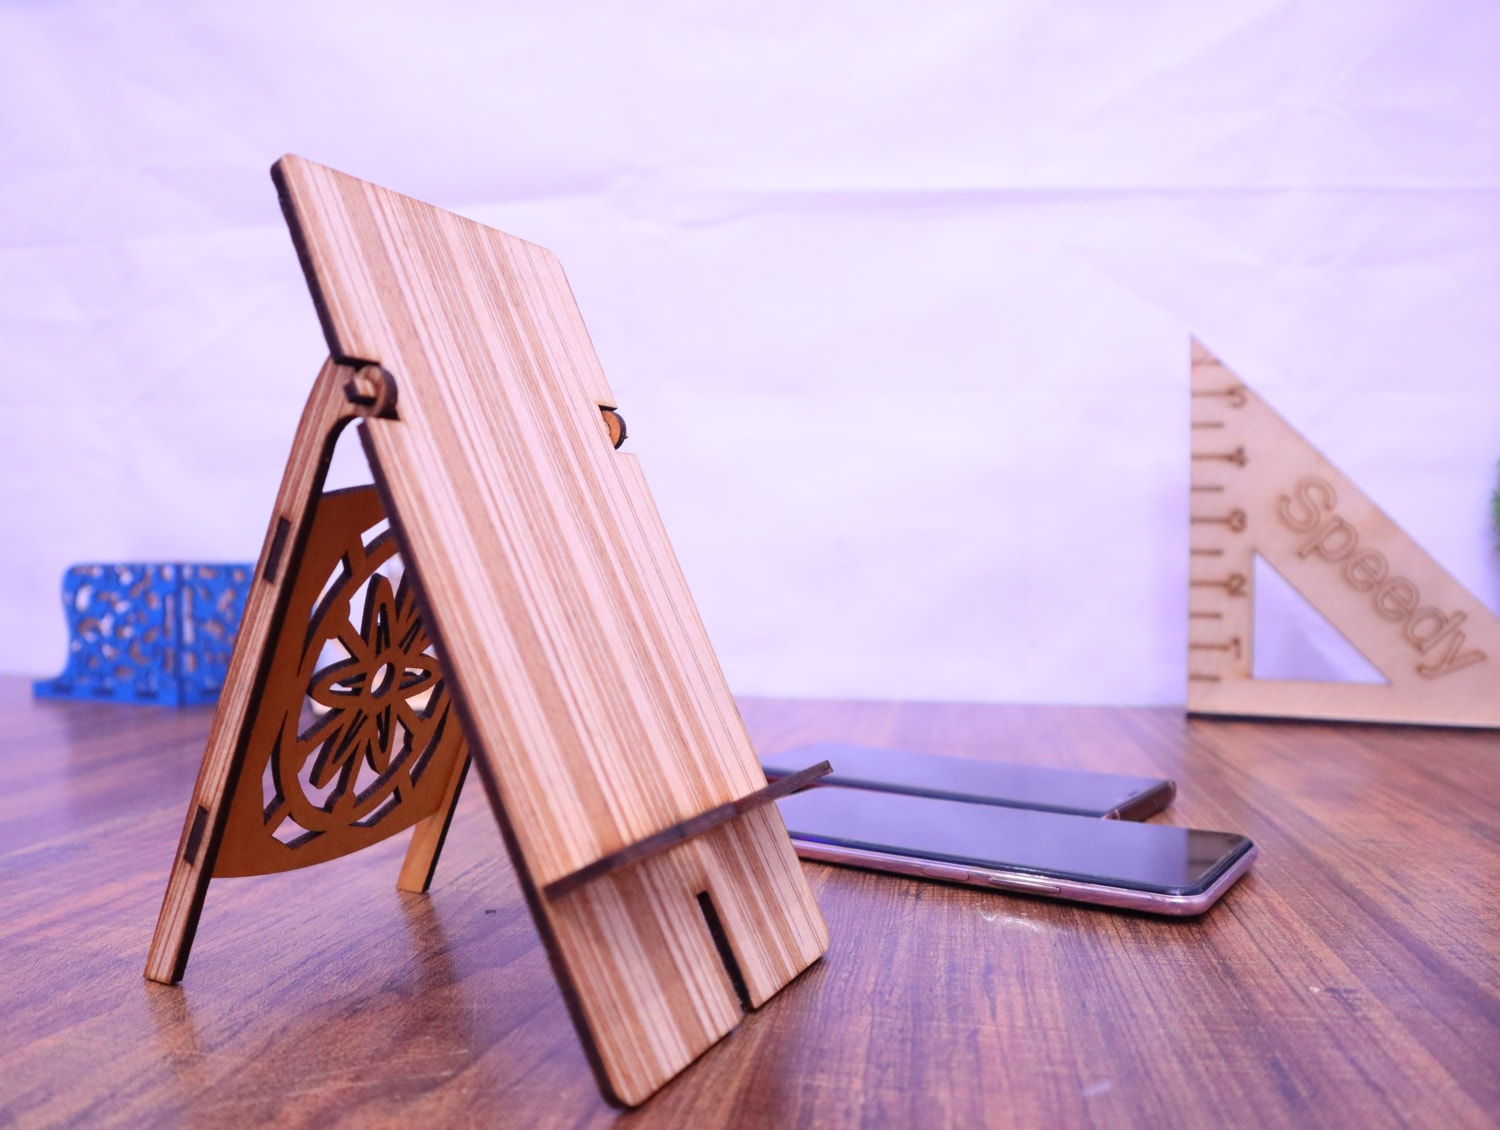 Laser Cut Wood Desk Phone Stand Free Vector